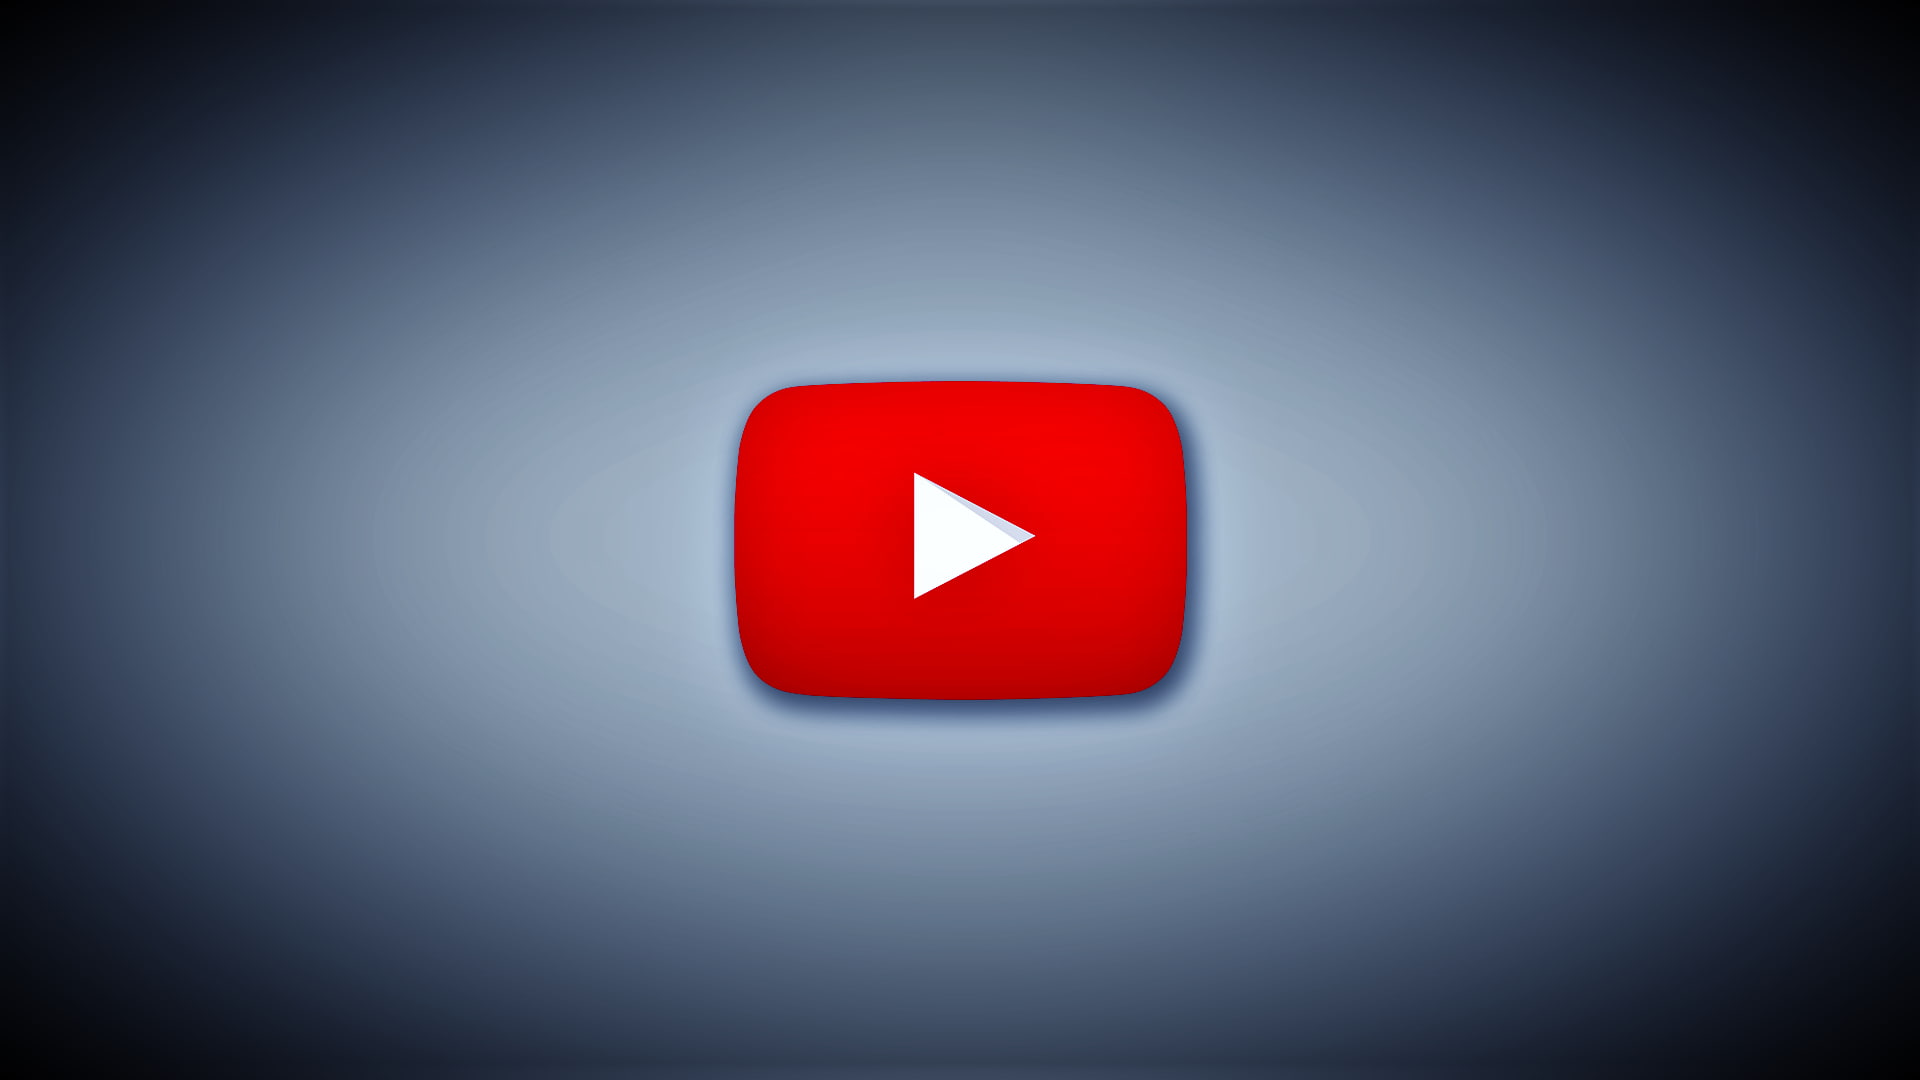 3D, digital art, YouTube, red, white, simple, indoors, sign